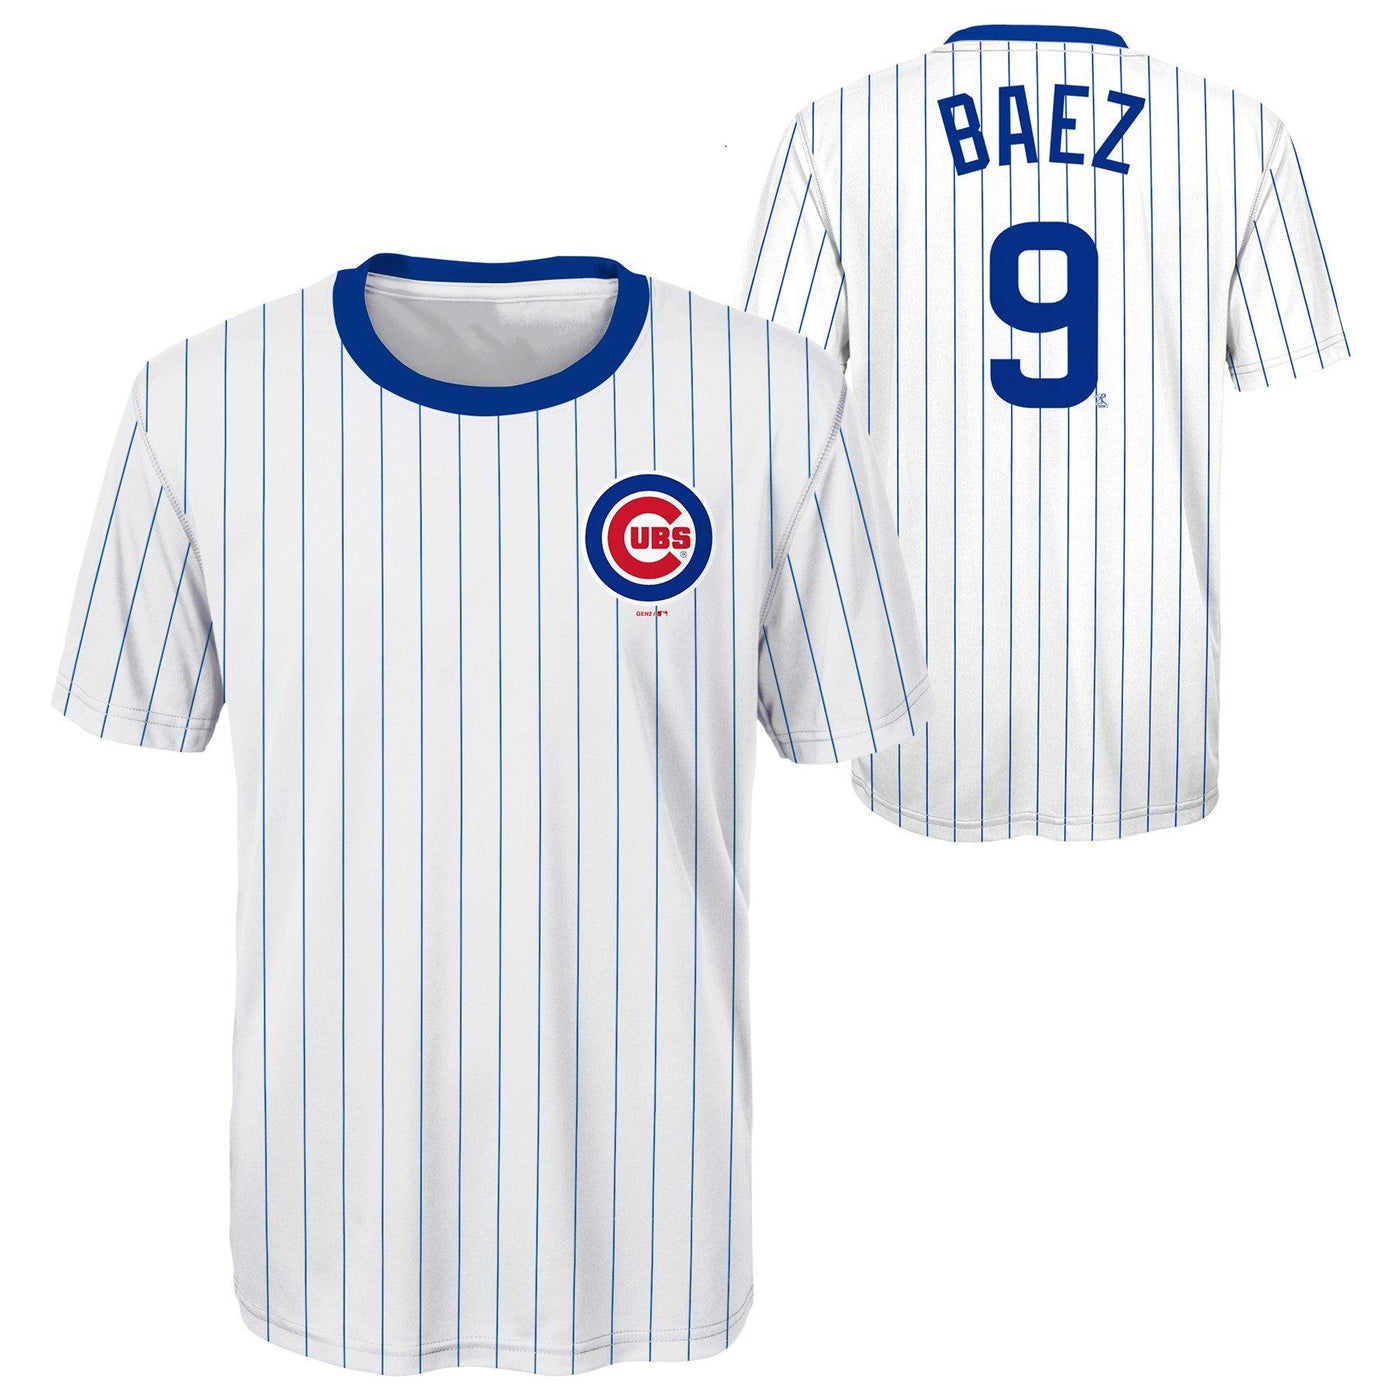 youth xl cubs jersey